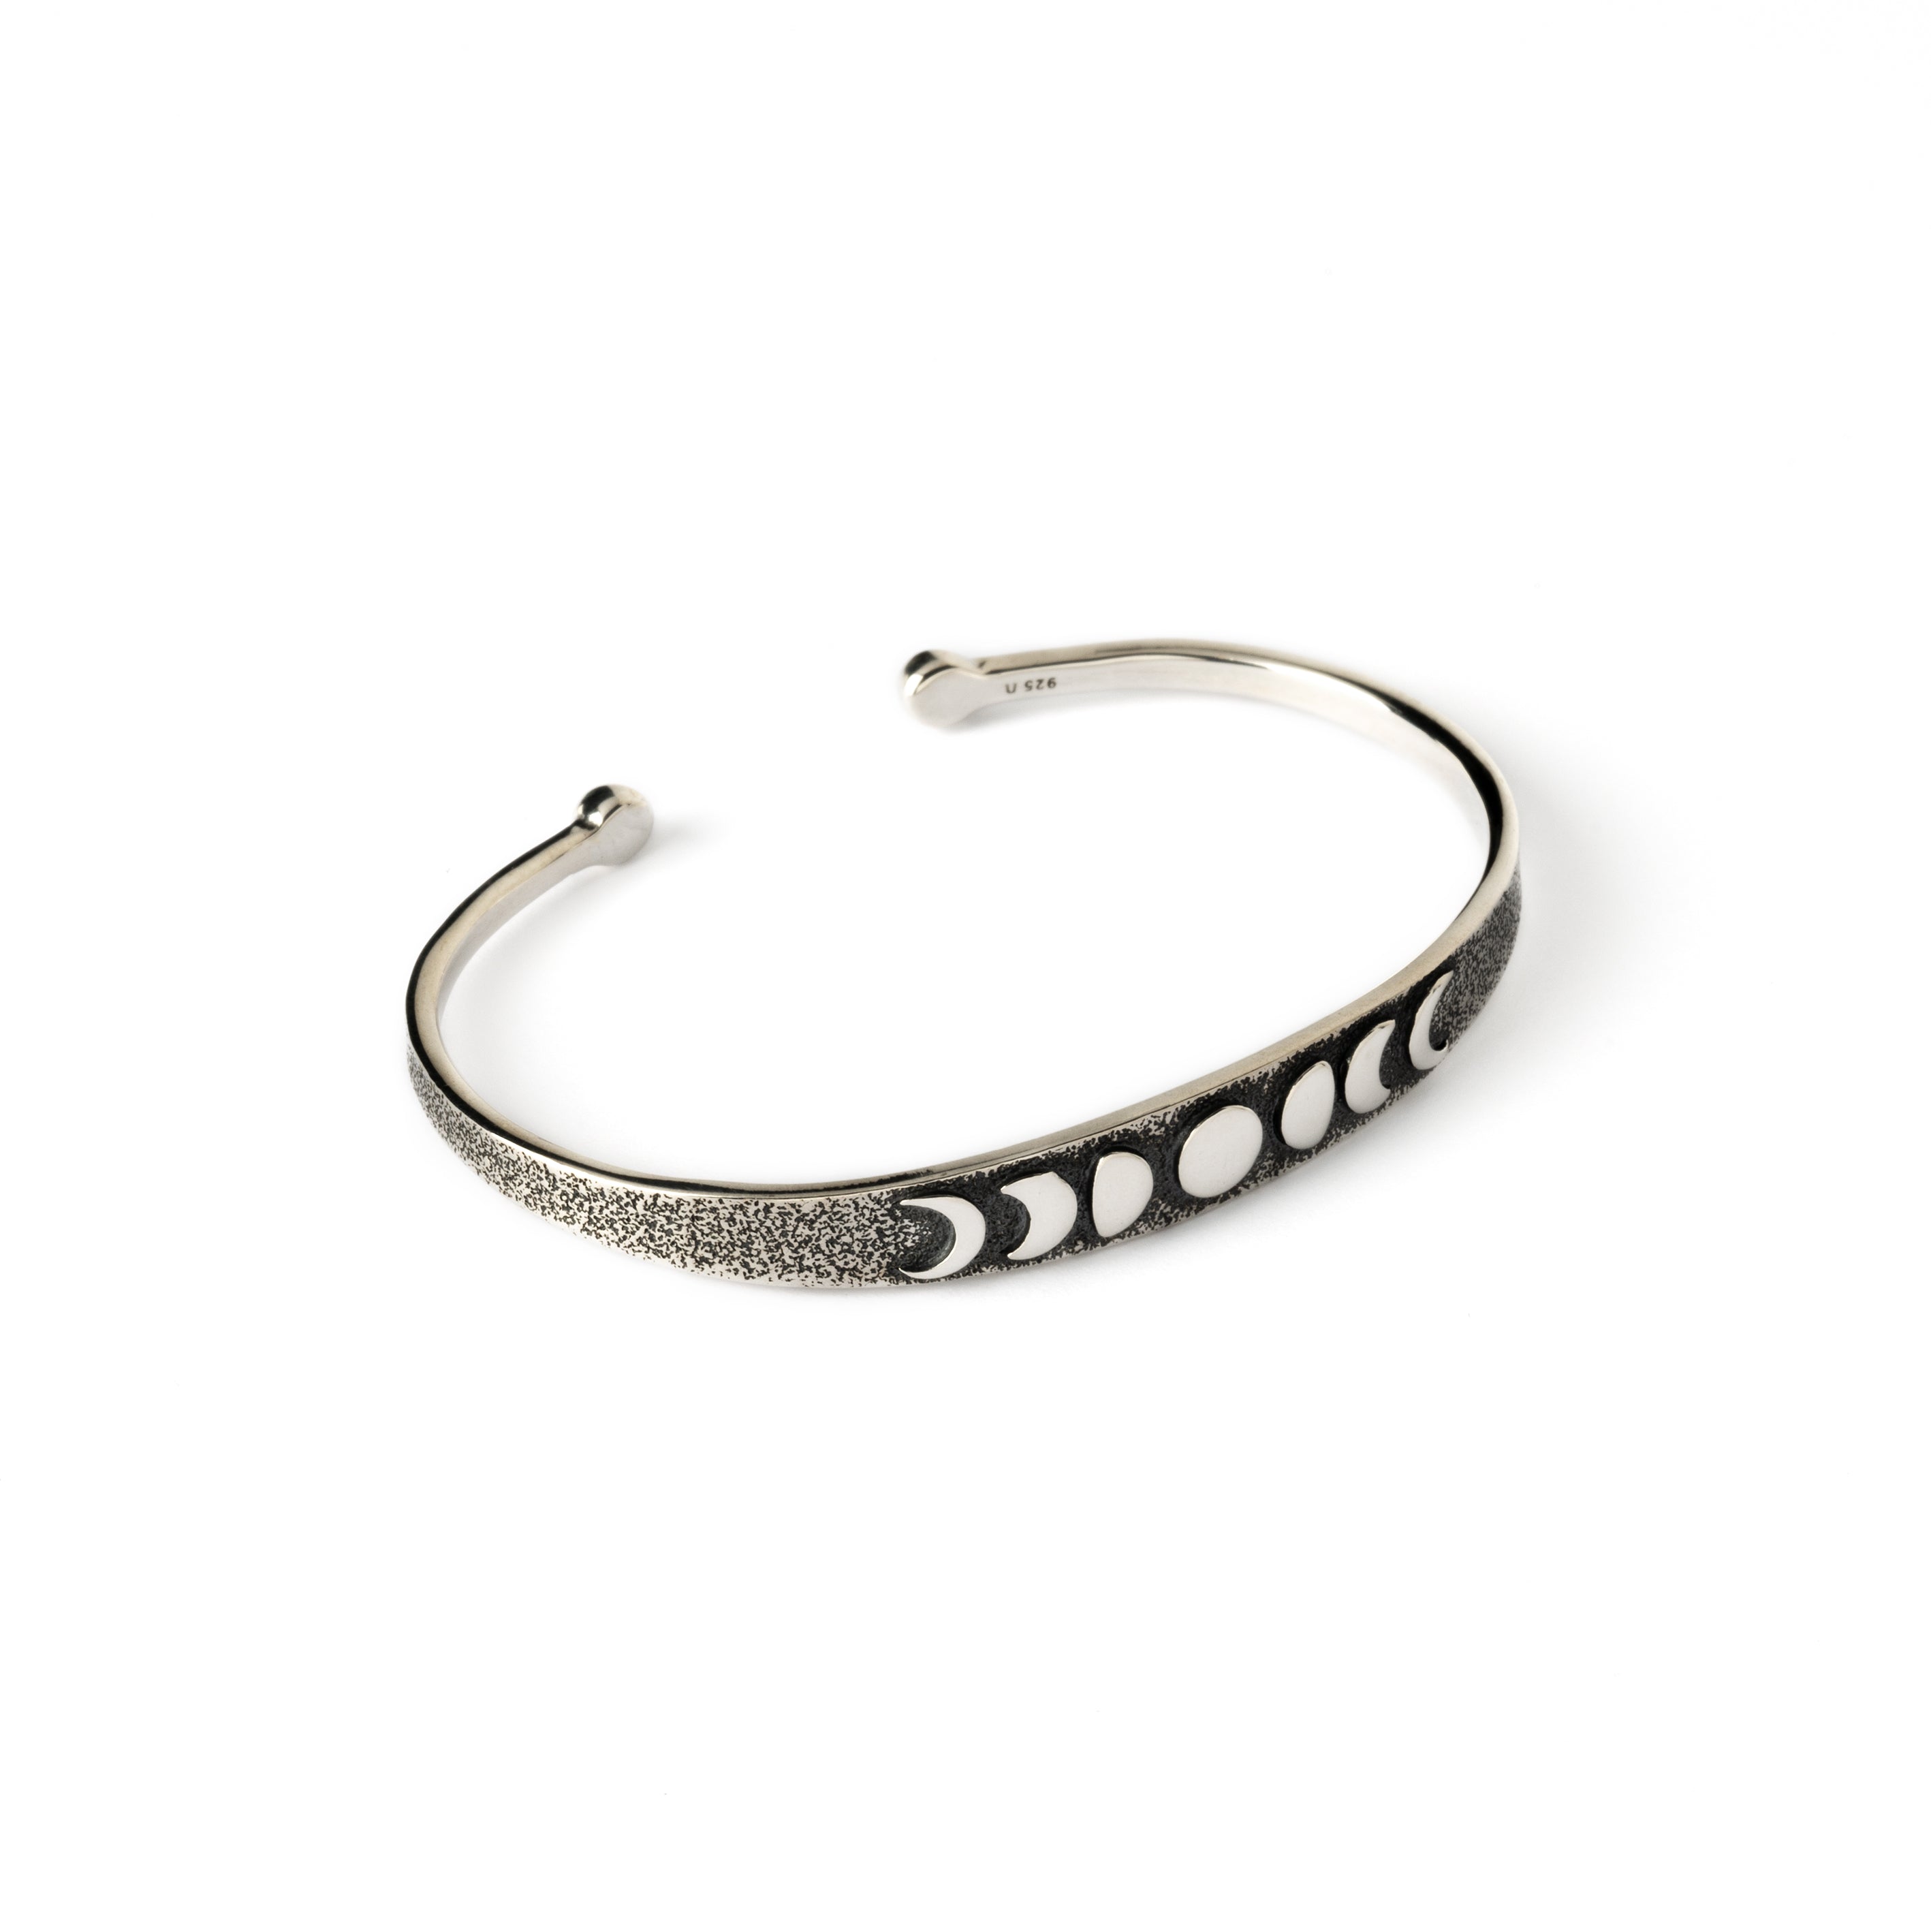 oxidised silver thin open bangle bracelet with embossed moon phases at the front side view